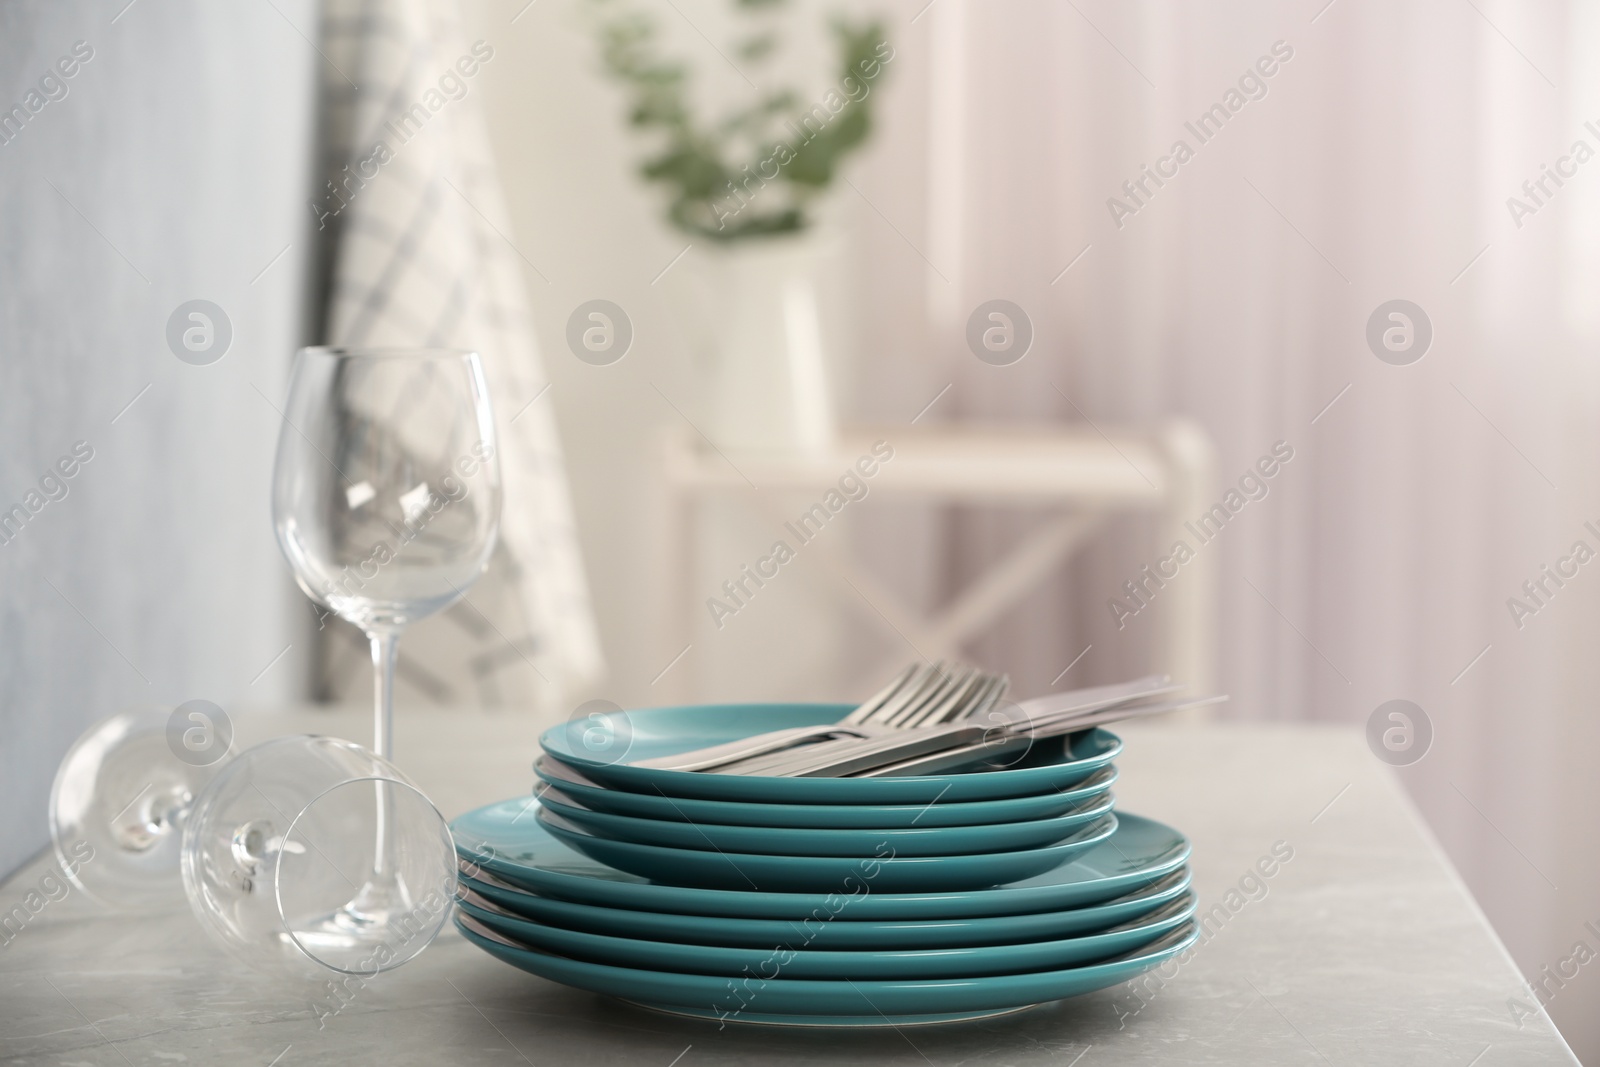 Photo of Setclean dishware, cutlery and wineglasses on grey table indoors. Space for text